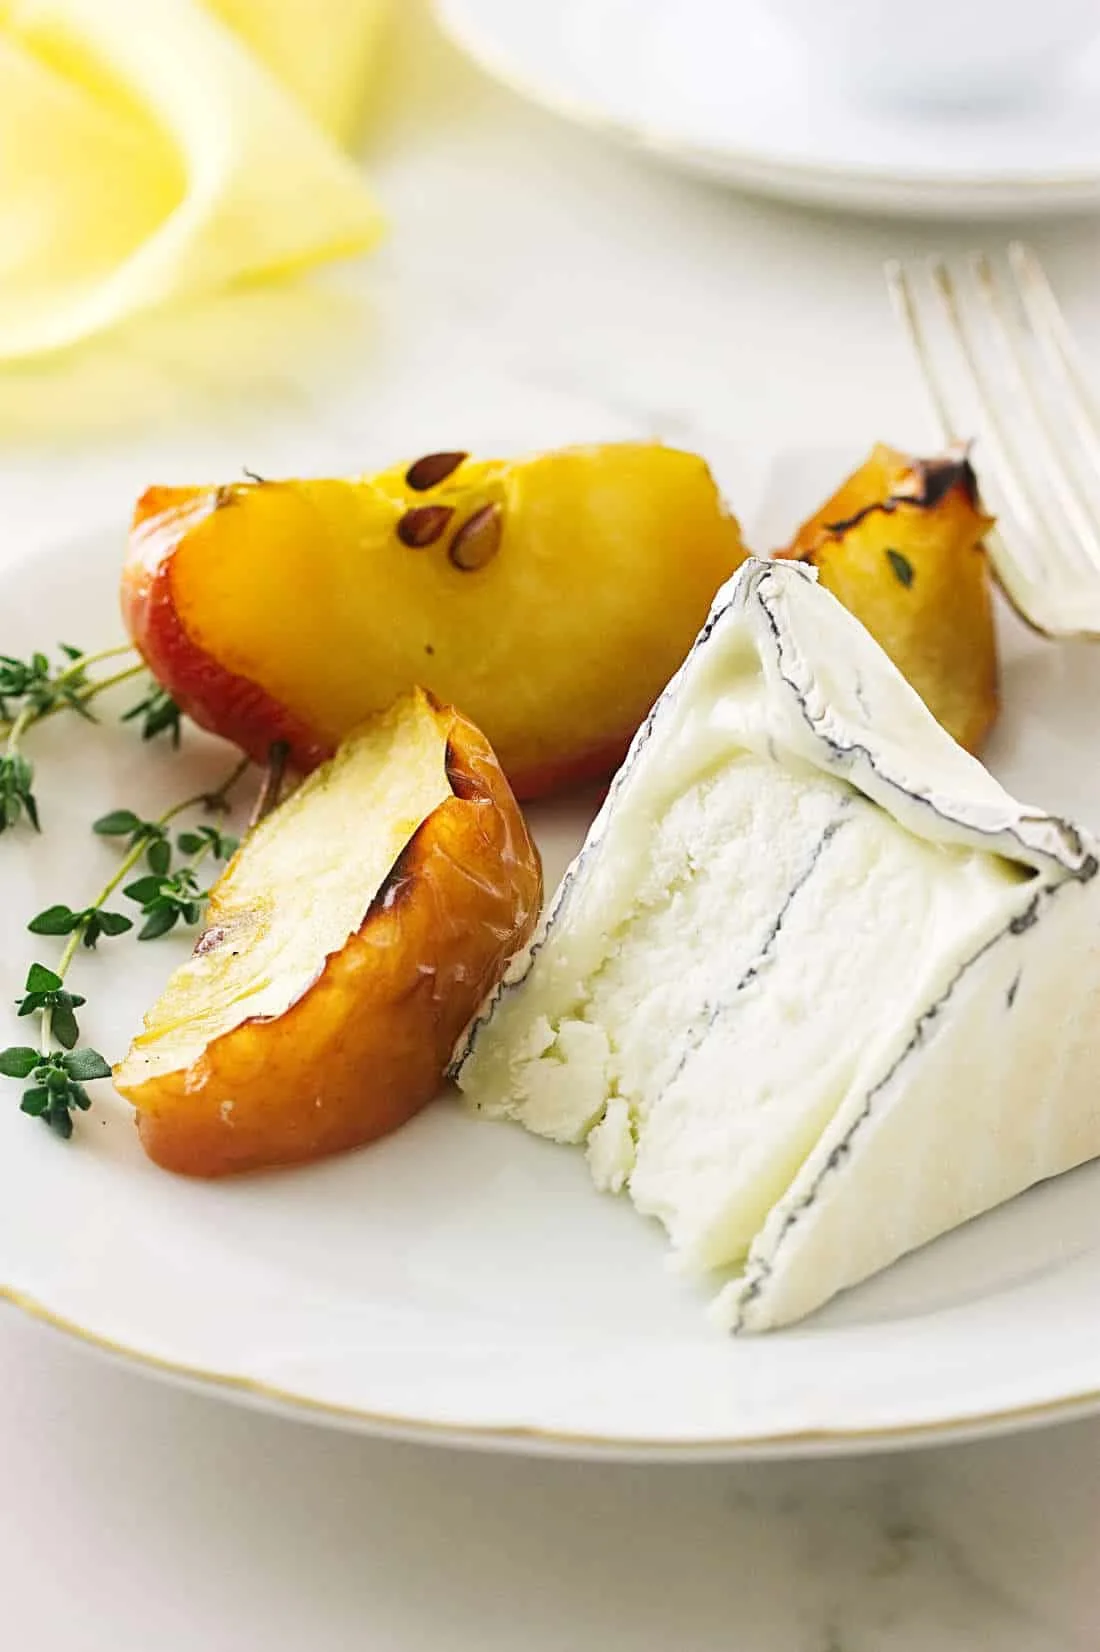 Roasted Apples and Aged Goat Cheese